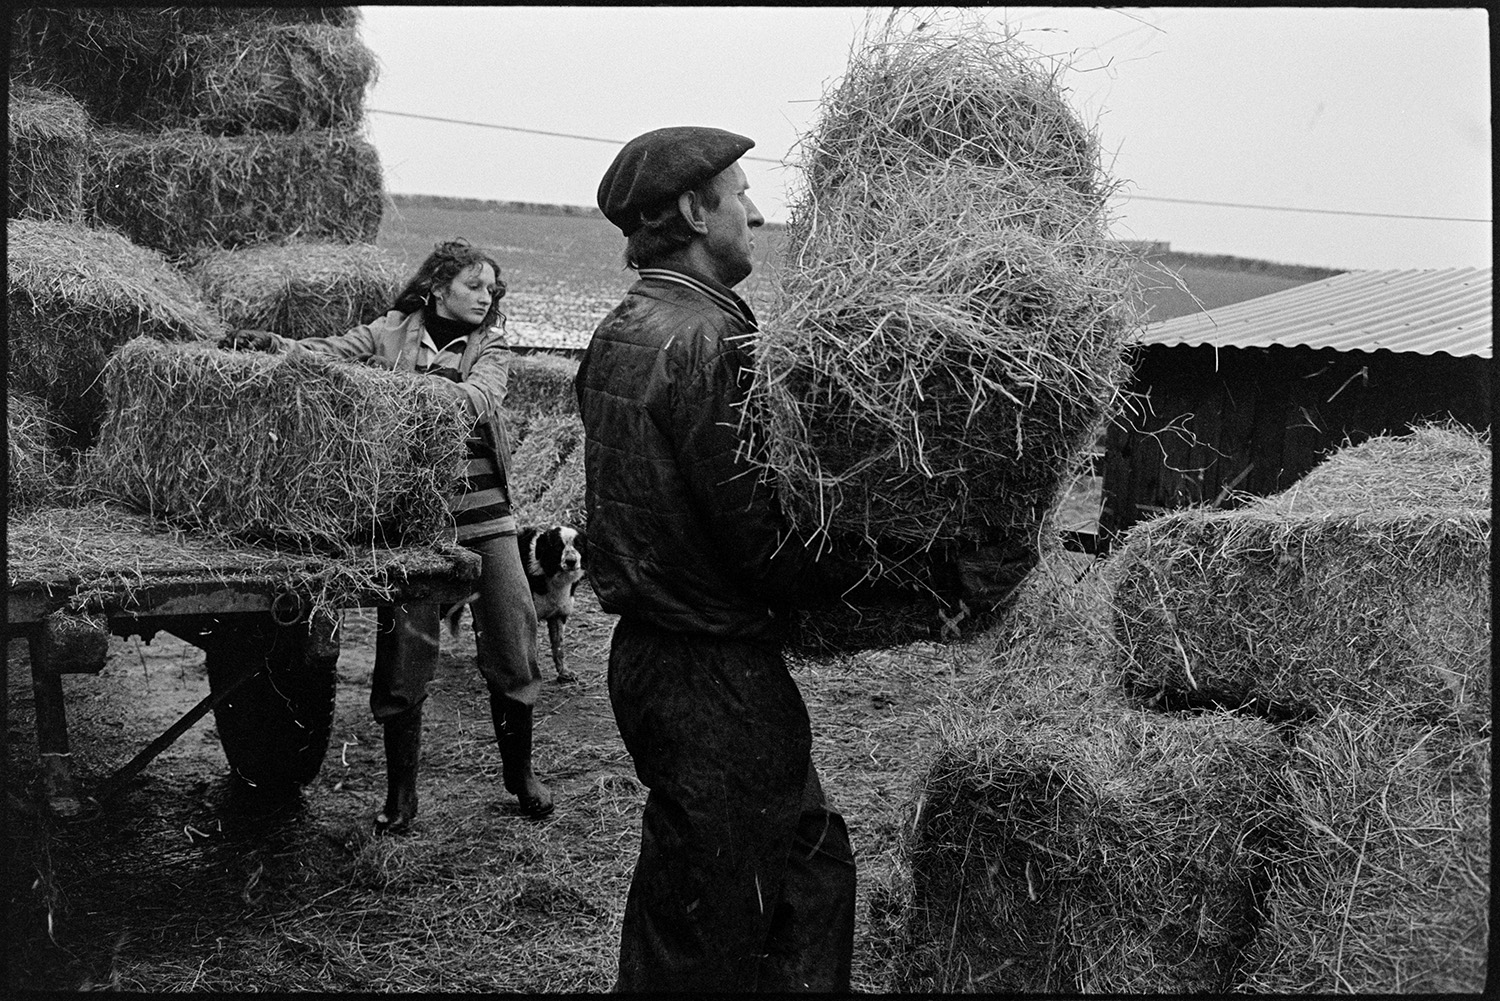 Farmer and his daughter loading hay and walking in fields. 
[Ivor Bourne and his daughter, Marylin Bourne, unloading hay bales from a trailer at Jeffrys, Beaford, also known as Mill Road Farm.]